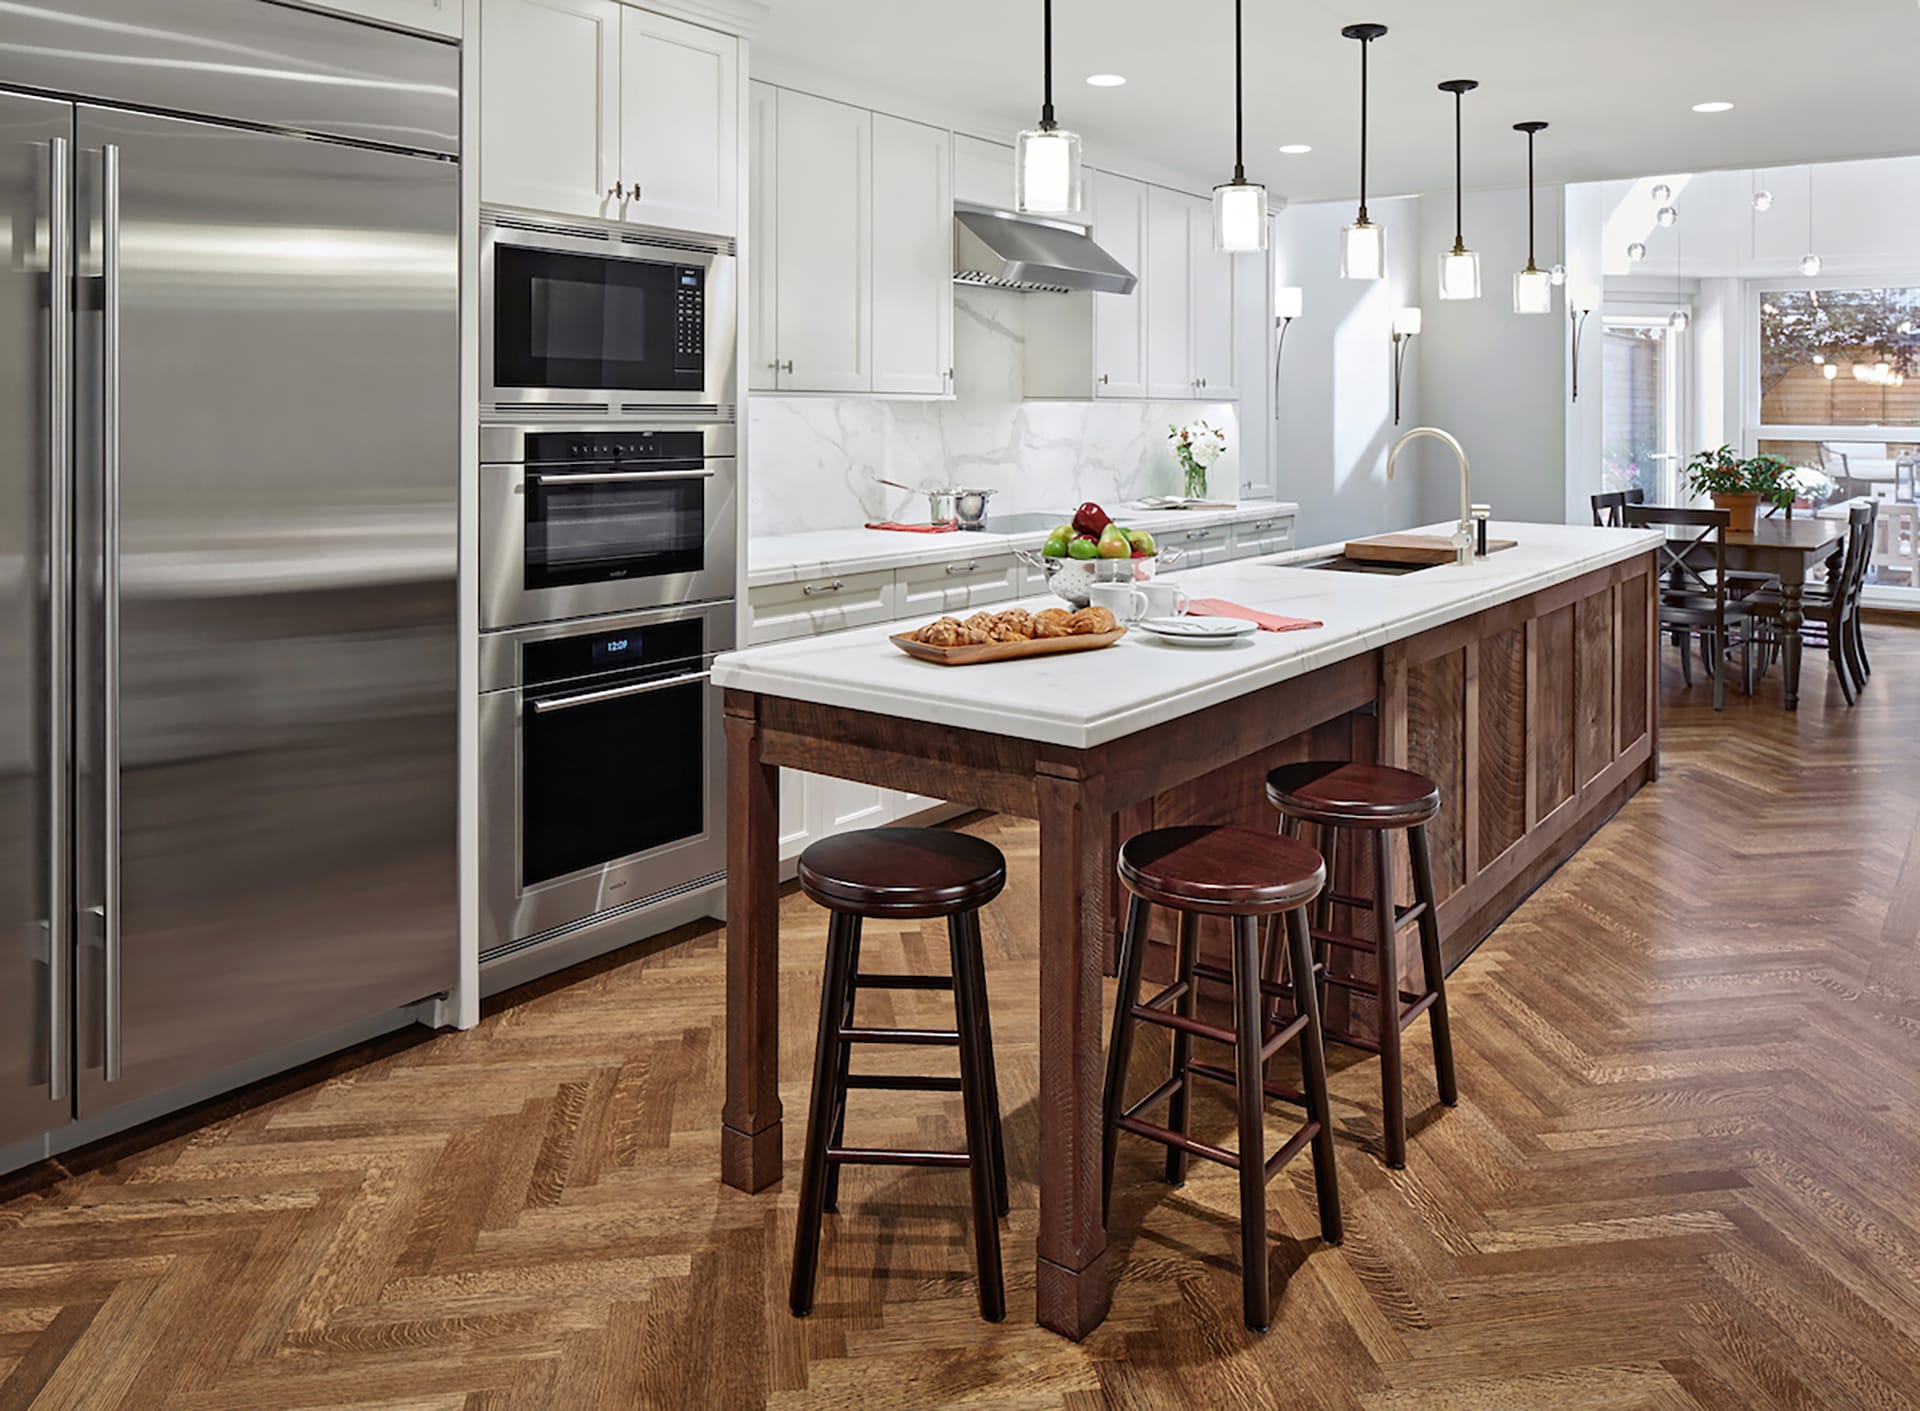 Kitchen with herringbone wood floors, pendant lights above the island, and white cabinetry.